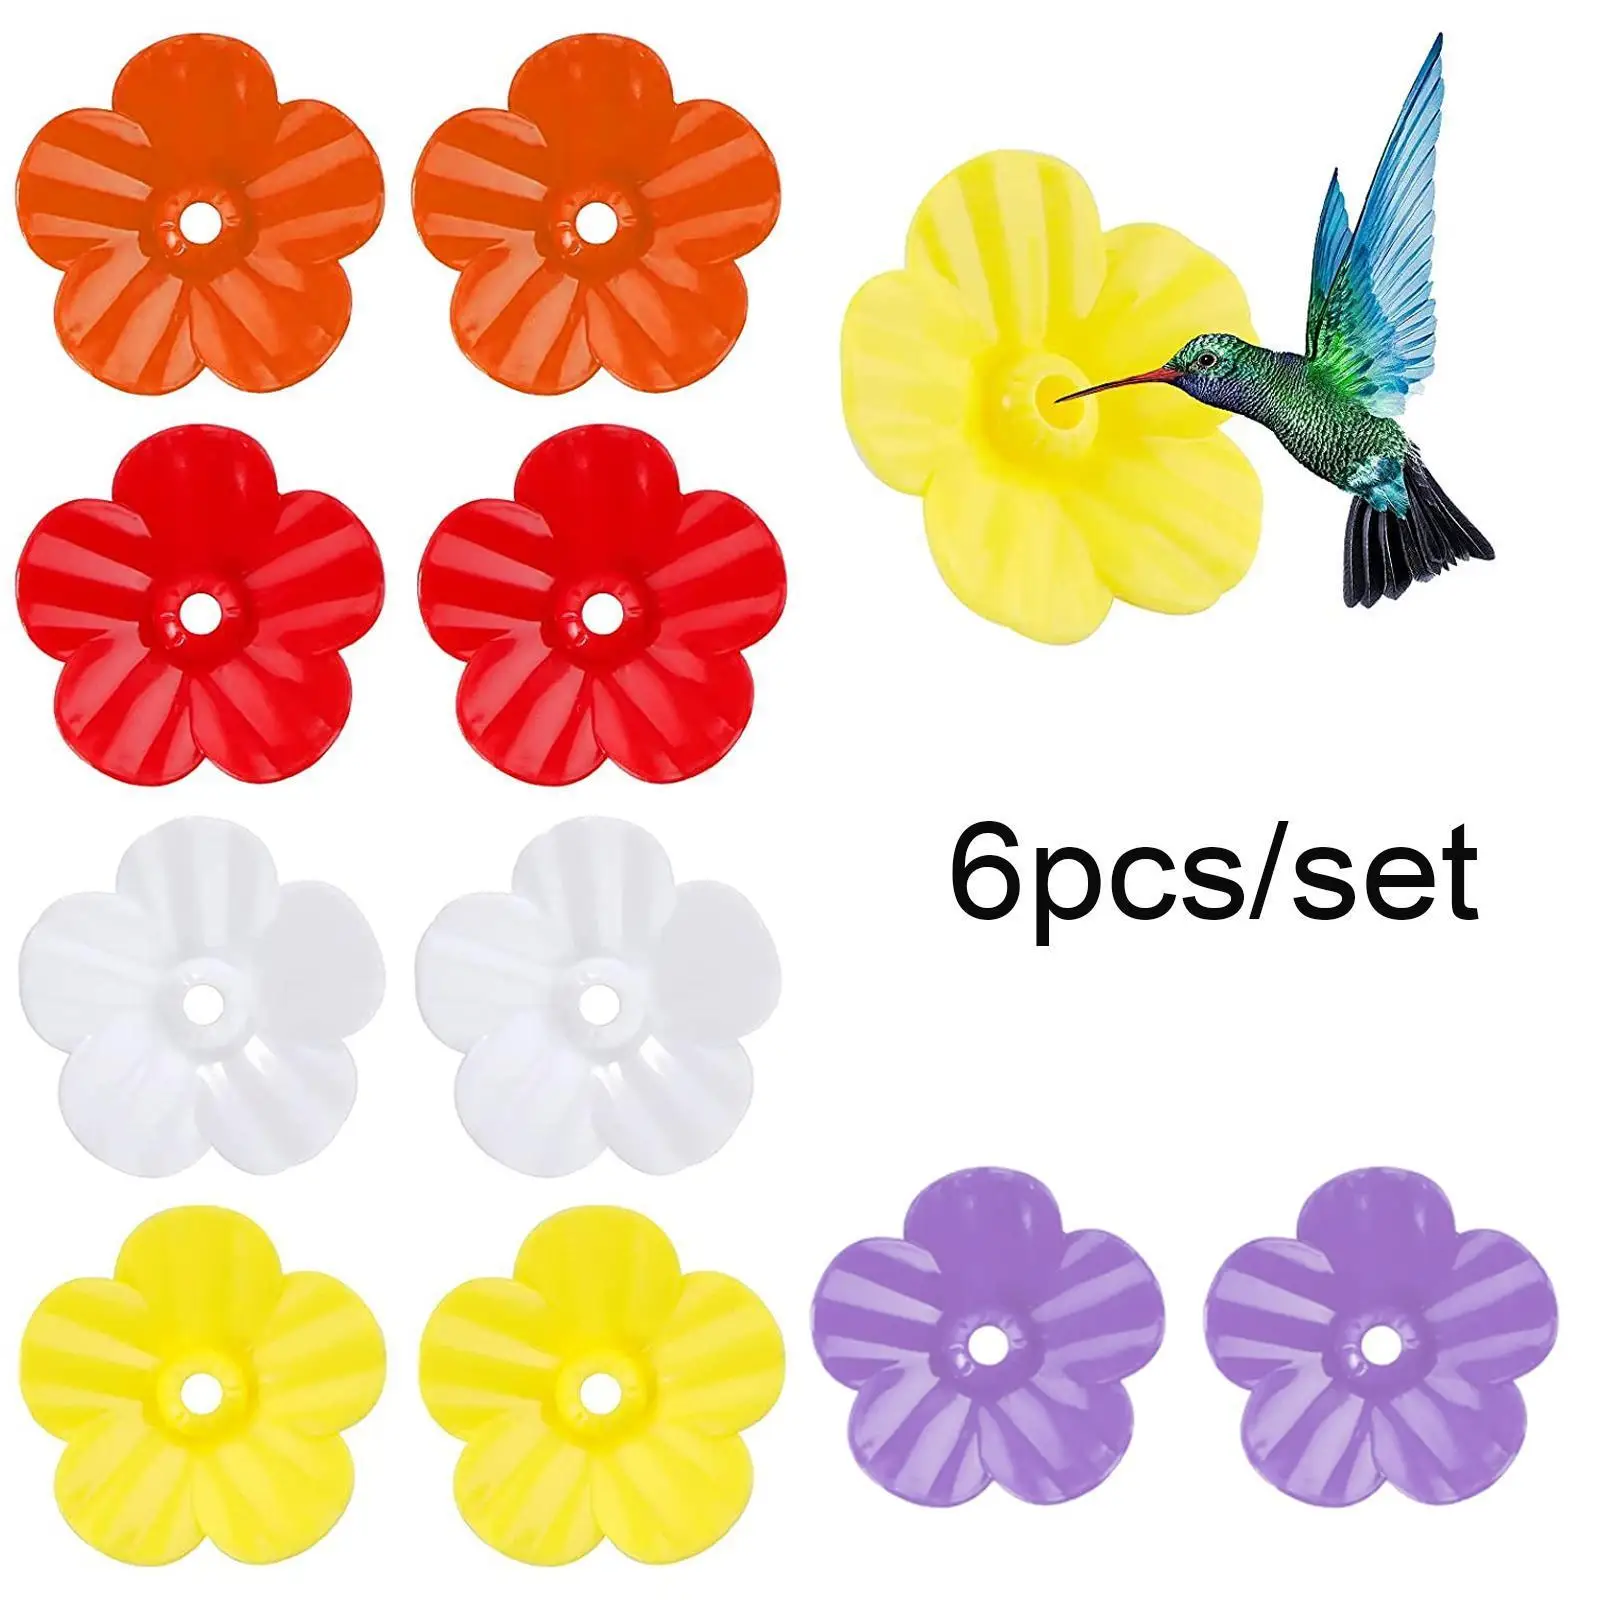 Flowers Outdoor Plastic Feeding Ports Replacement Parts For Feeder Hanging Use Supply L6y6